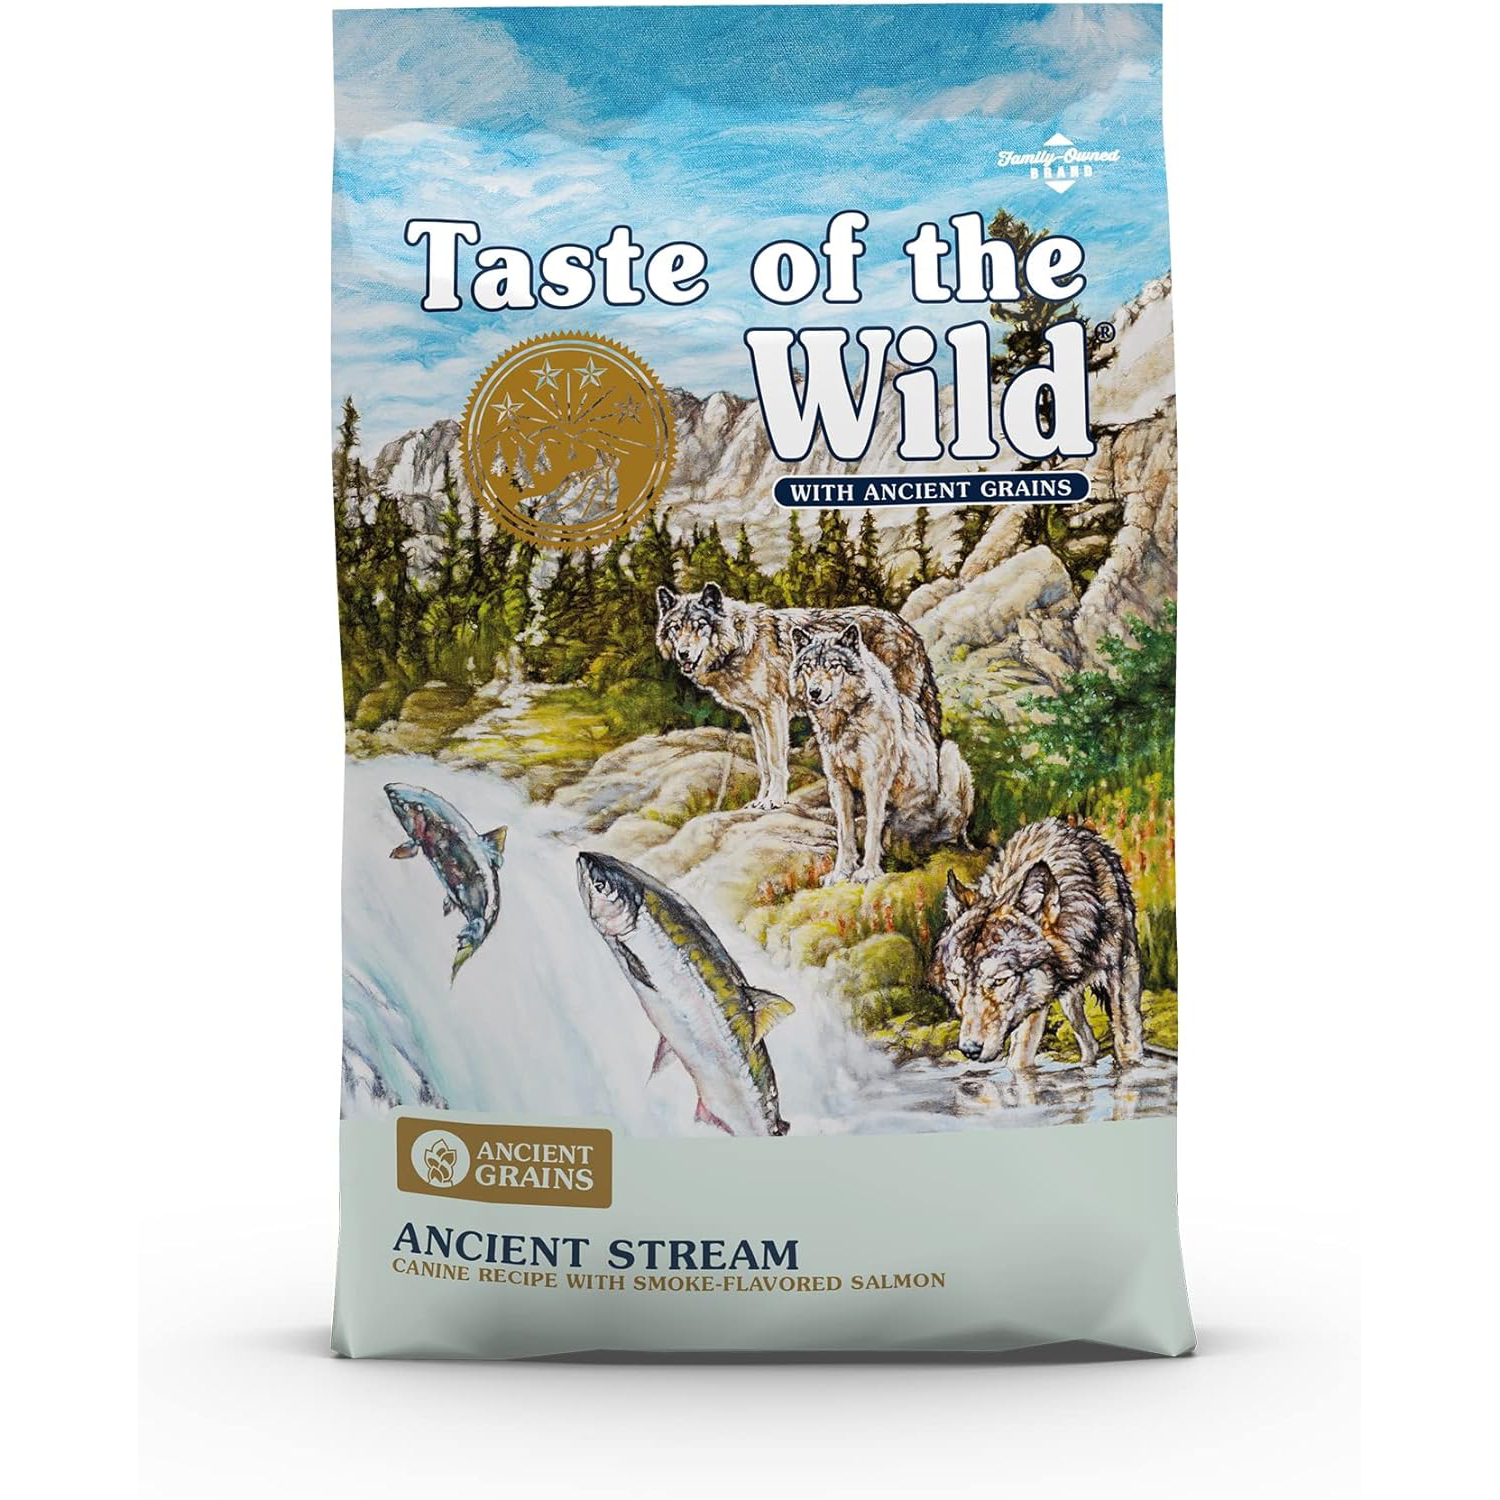 Taste of the Wild Ancient Streams with Ancient Grains